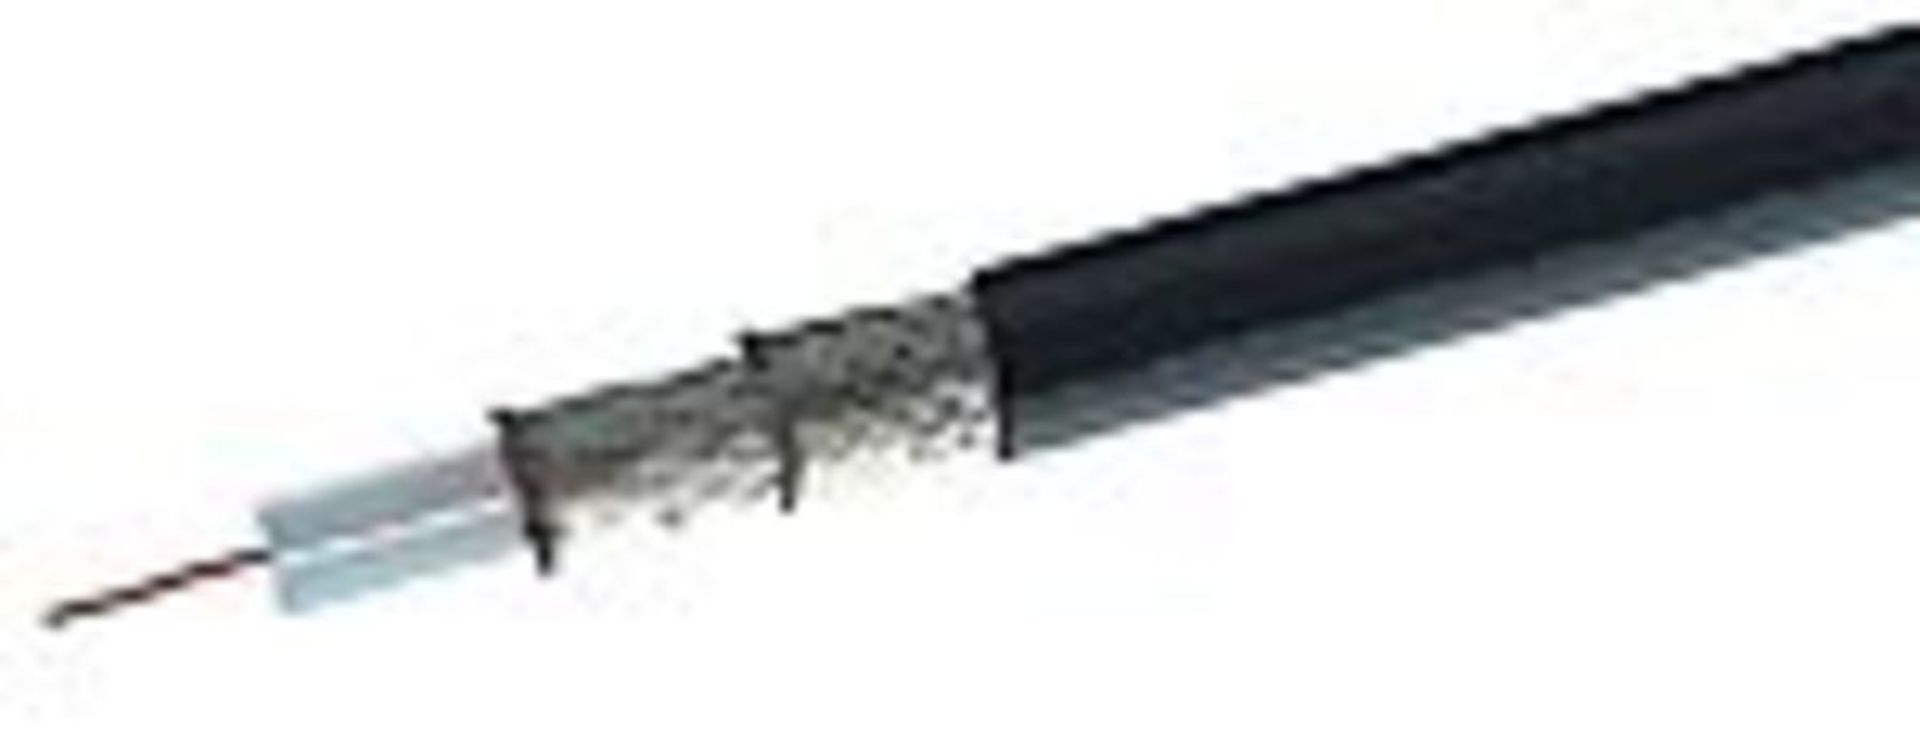 Belden Black RG59/U Coaxial Cable, 75 Ω 7.75mm OD 152m - Image 2 of 2